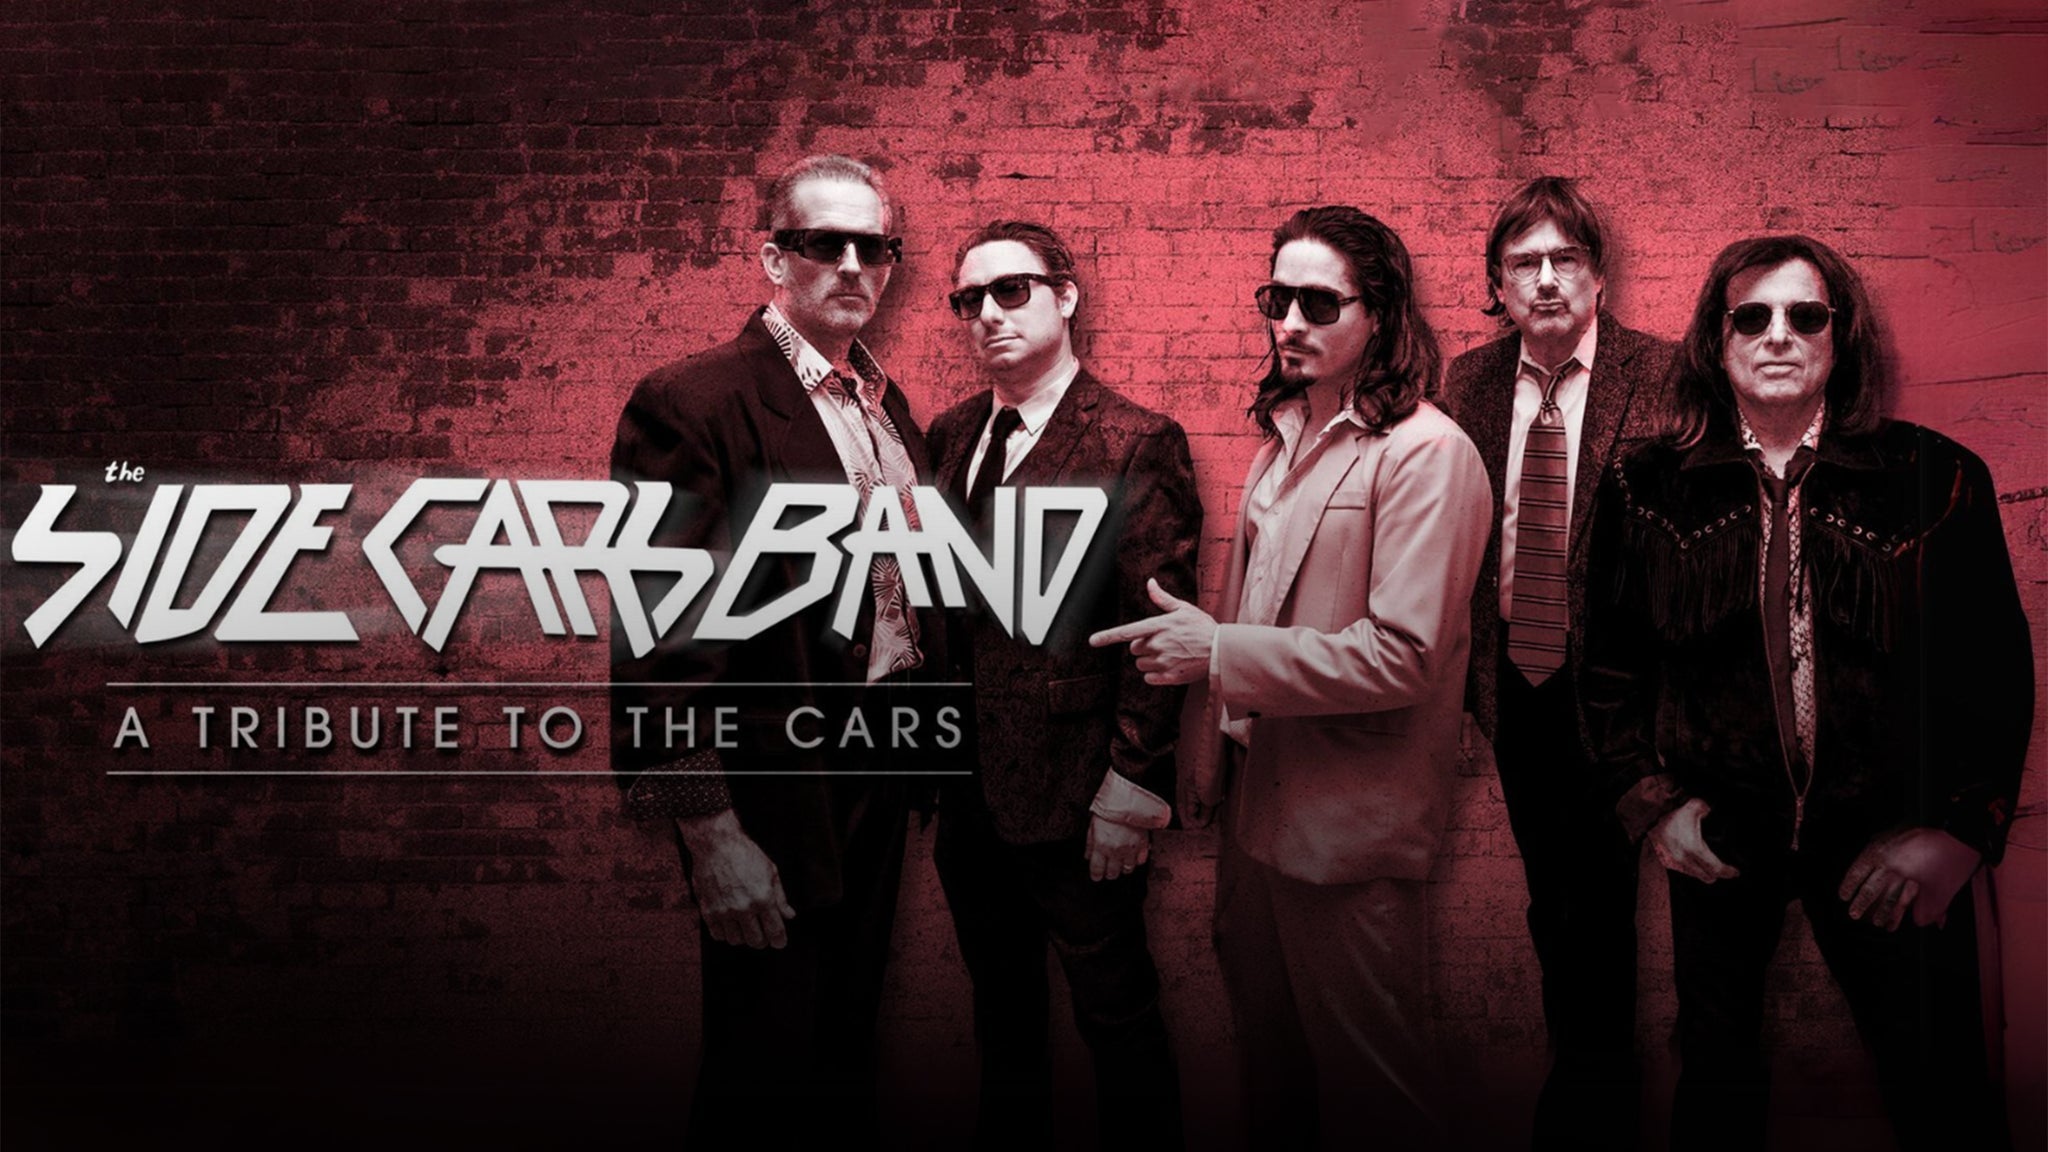 The Side Cars Band: A Tribute to the Cars